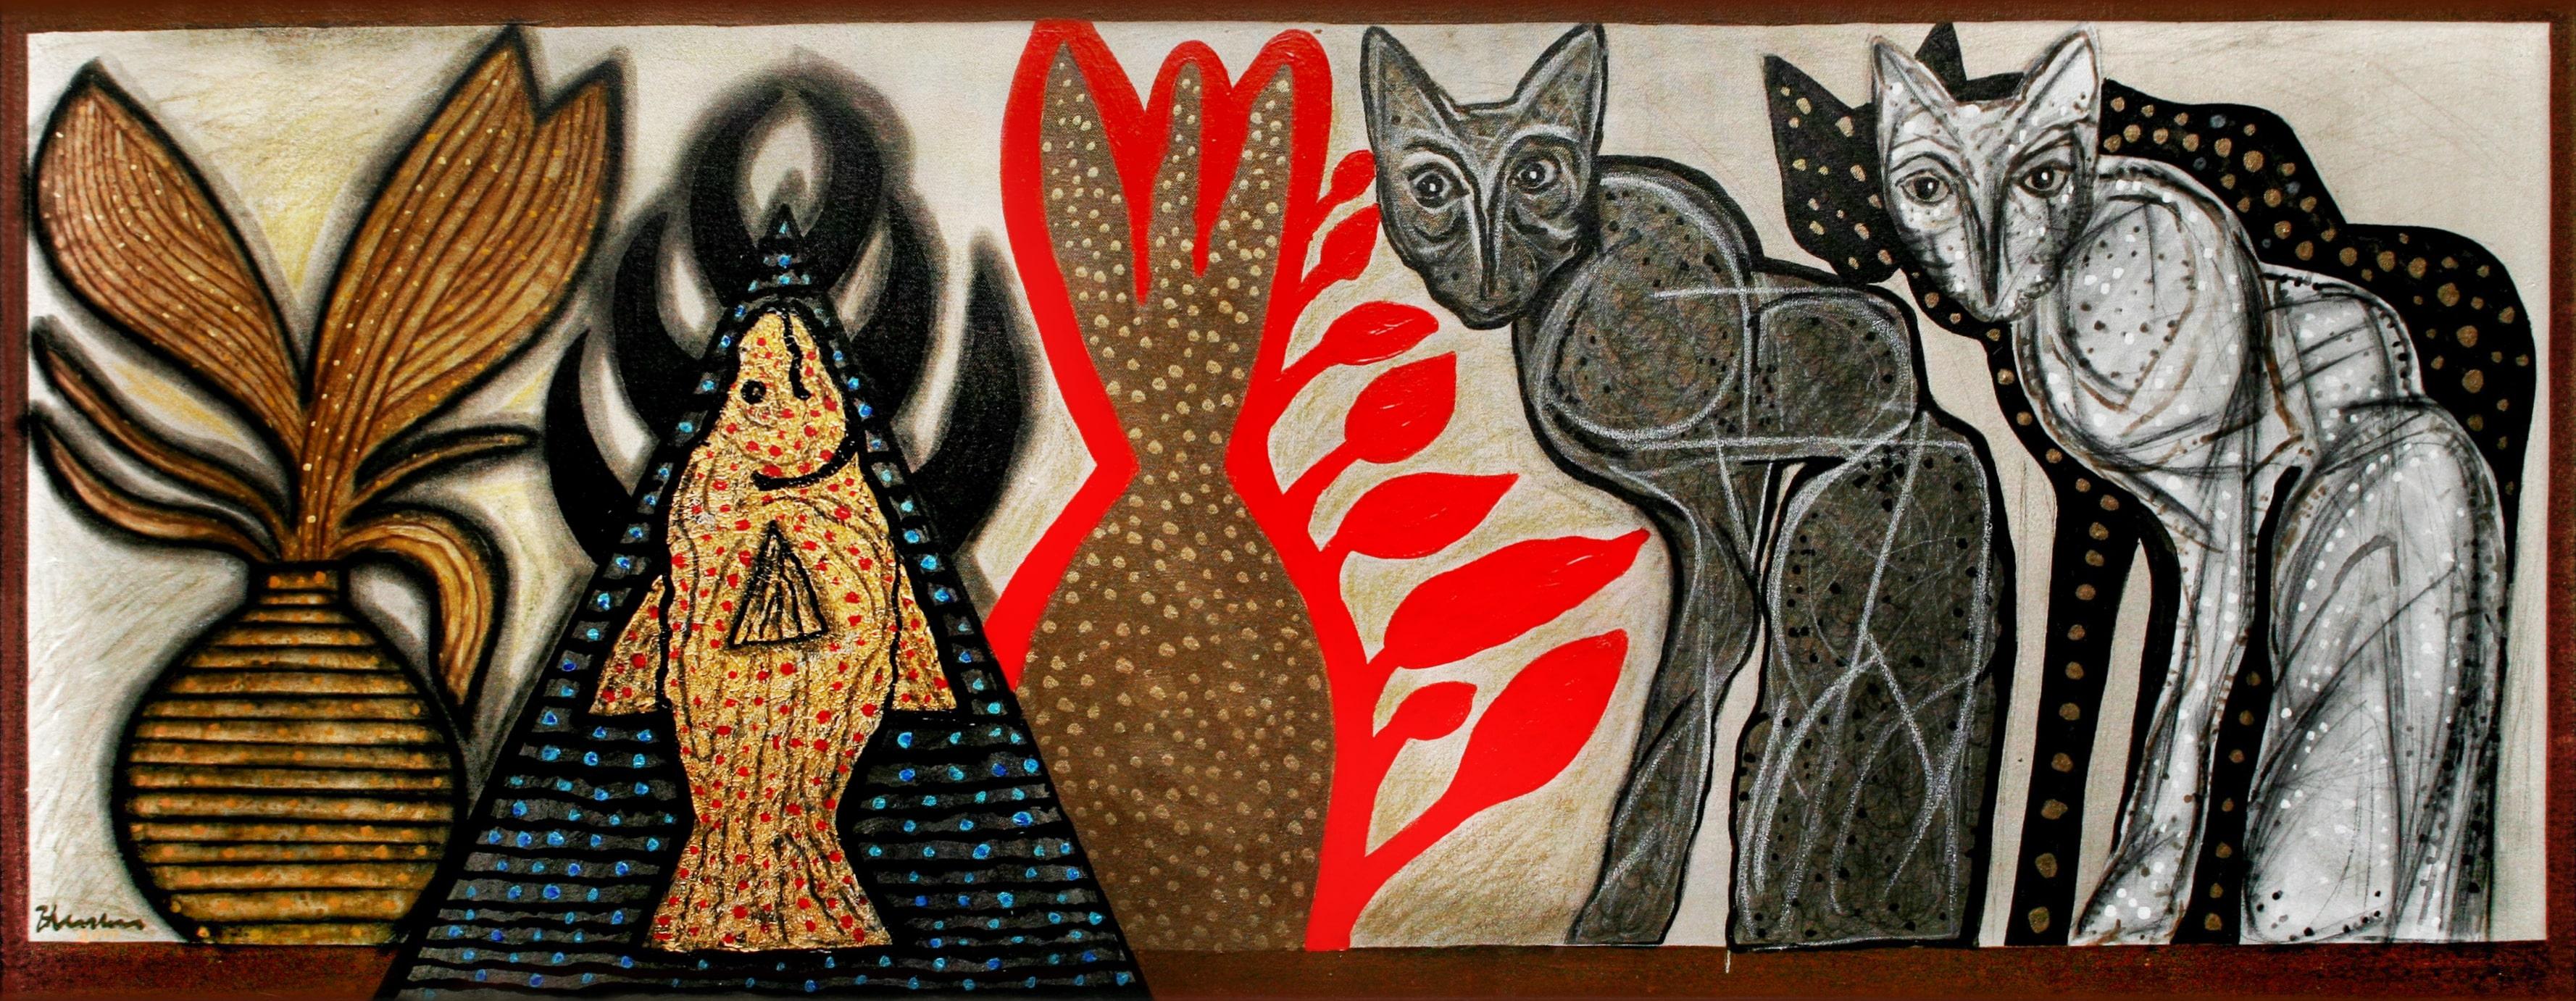 Modern Meets Retro Indian Art Madras, Cool Eclectic Cats Canvas Painting  